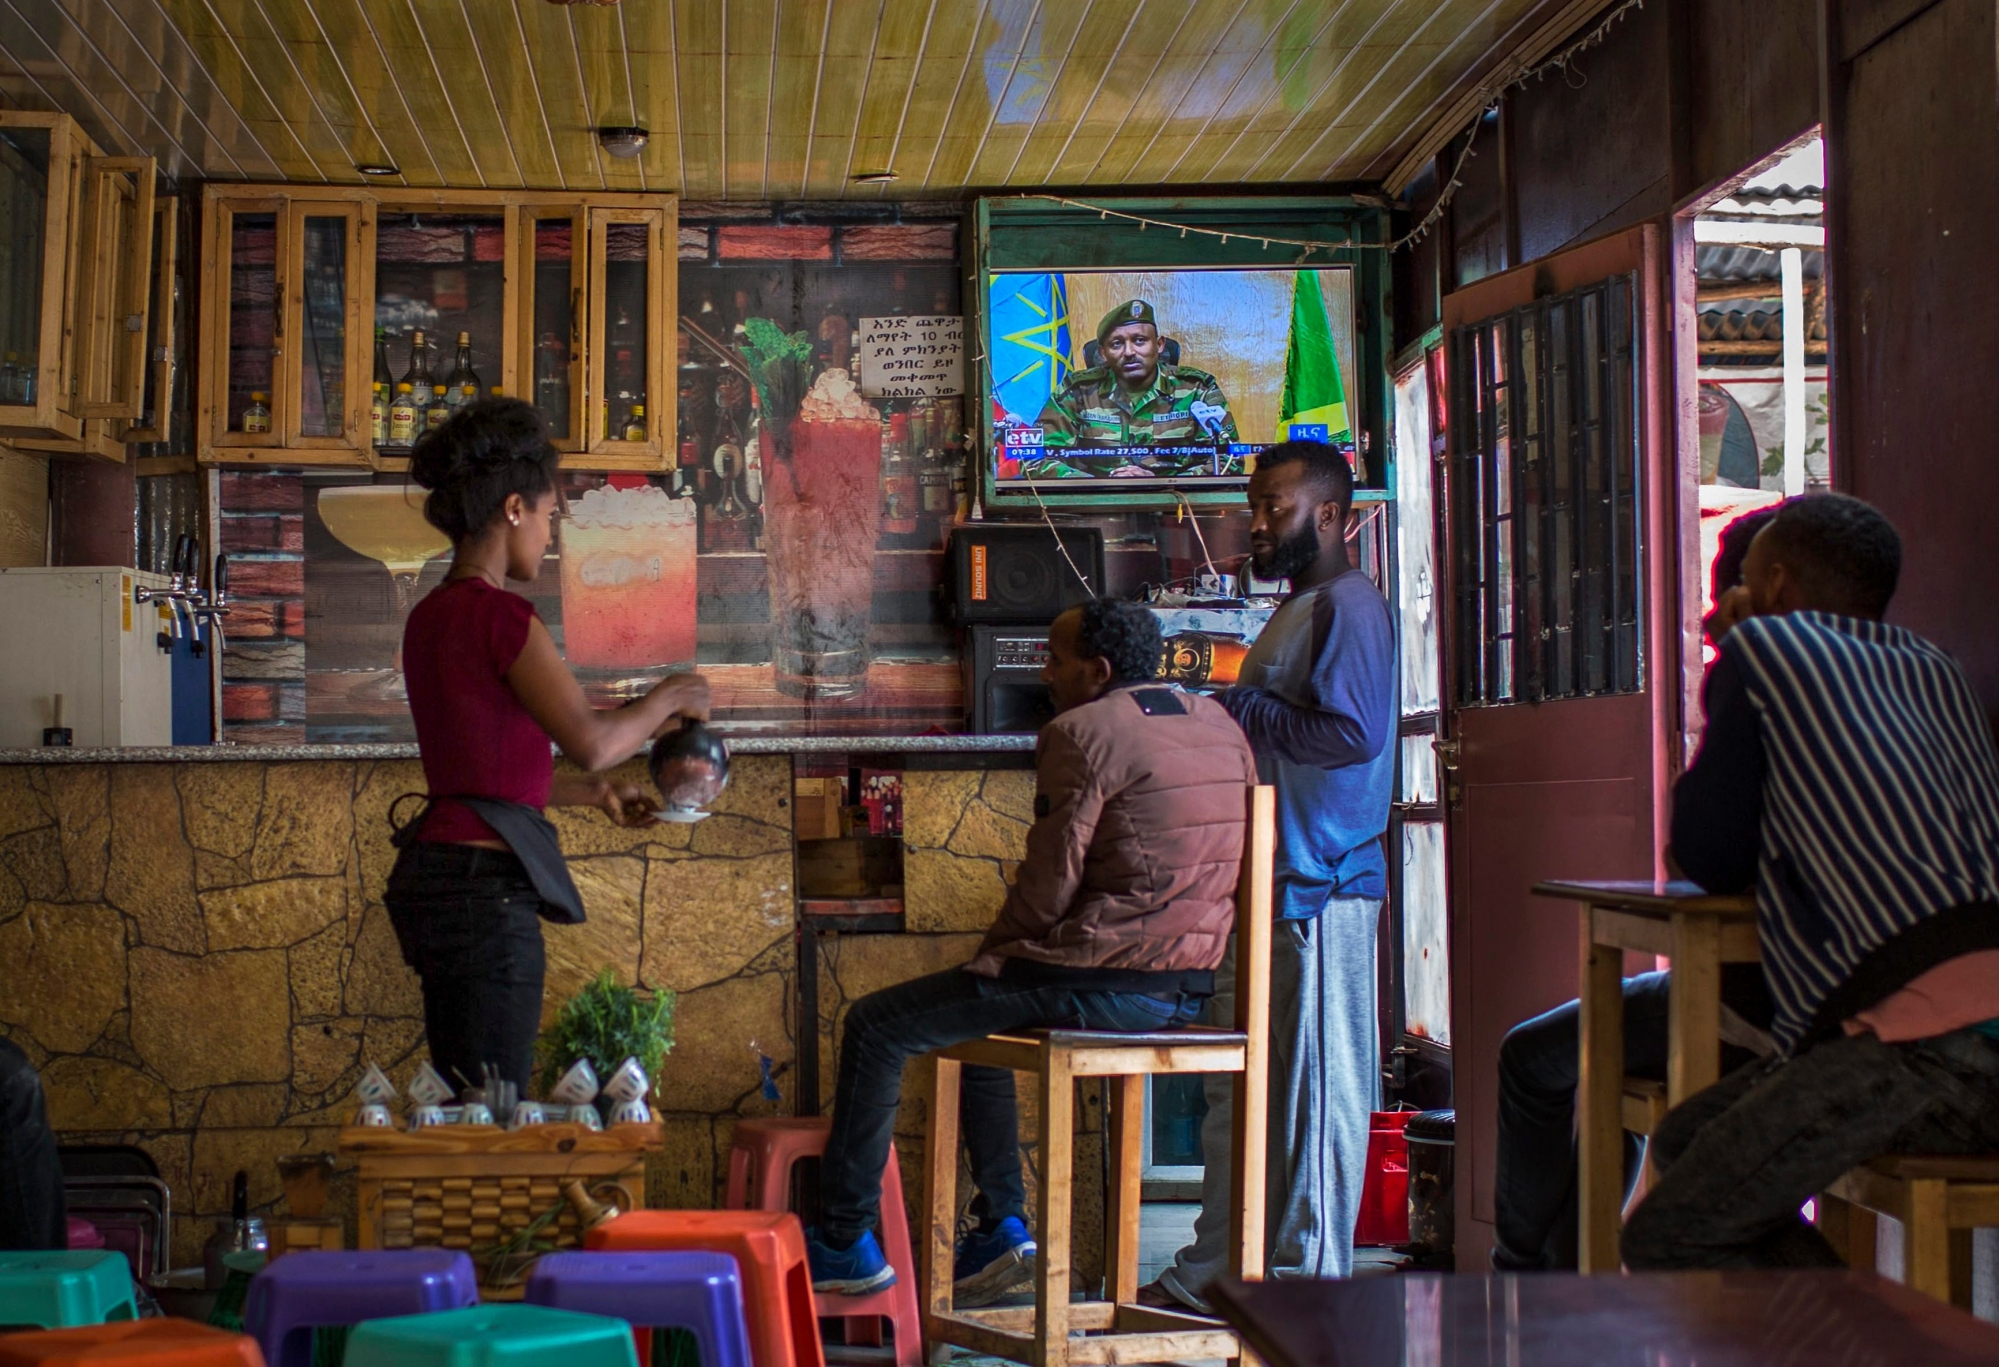 Ethiopians follow the news on television at a cafe in Addis Ababa, Ethiopia Sunday, June 23, 2019. Ethiopia's government foiled a coup attempt in a region north of the capital and the country's military chief was shot dead, the prime minister Abiy Ahmed said Sunday in a TV announcement. (AP Photo/Mulugeta Ayene) Ethiopia Unrest